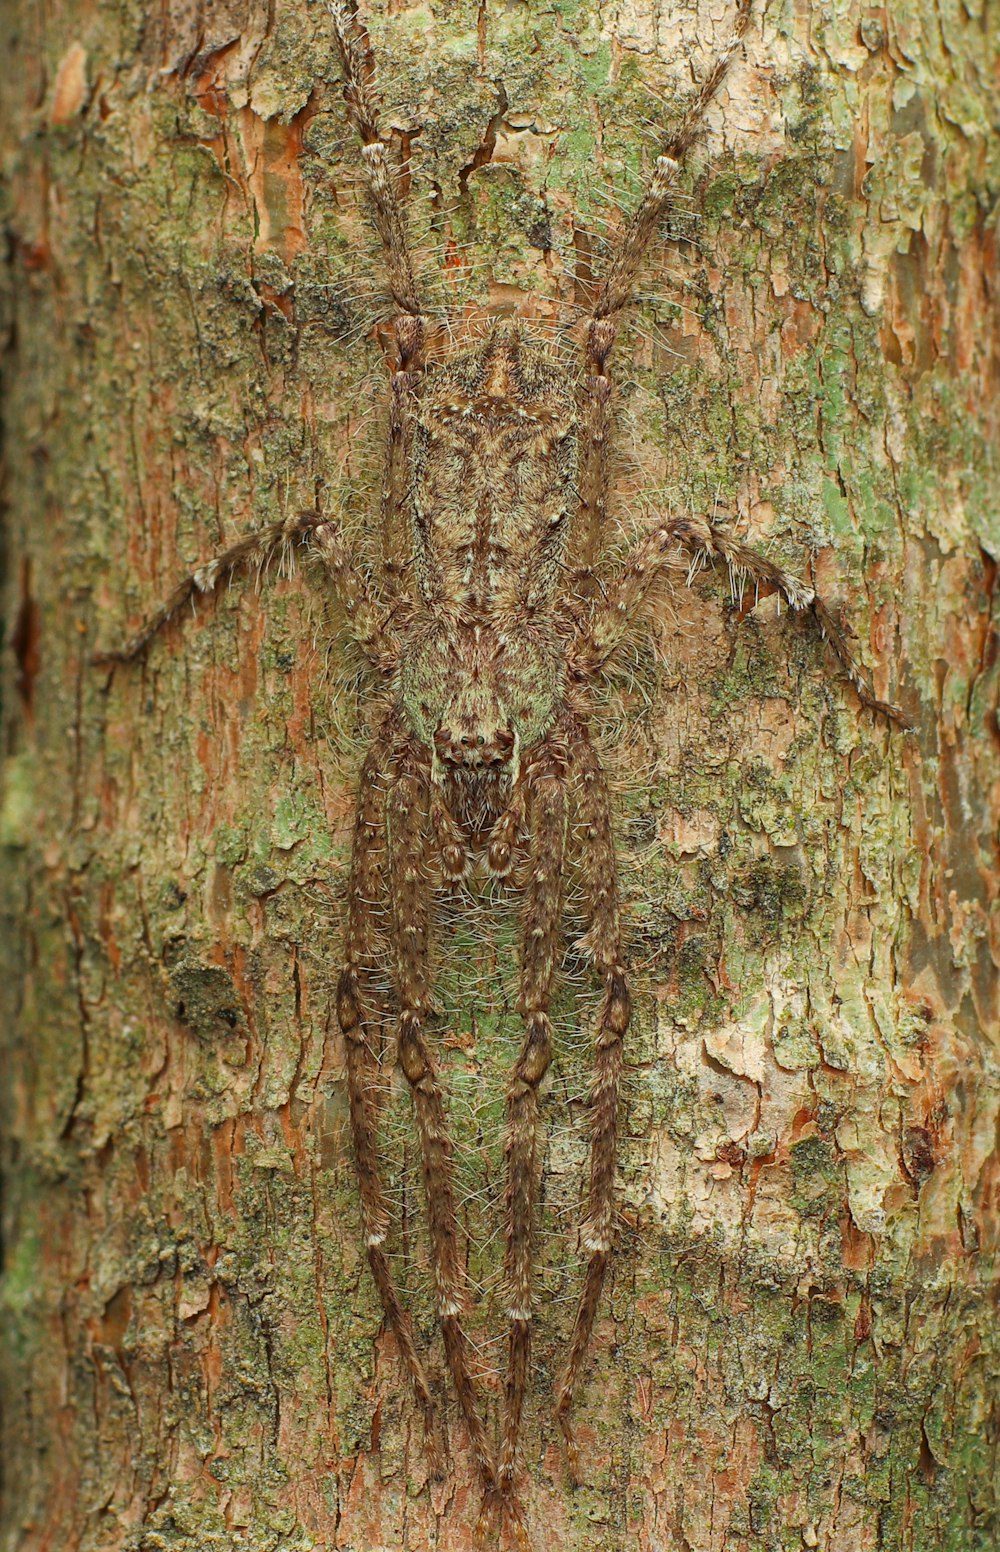 a close up of a tree trunk with a lizard on it